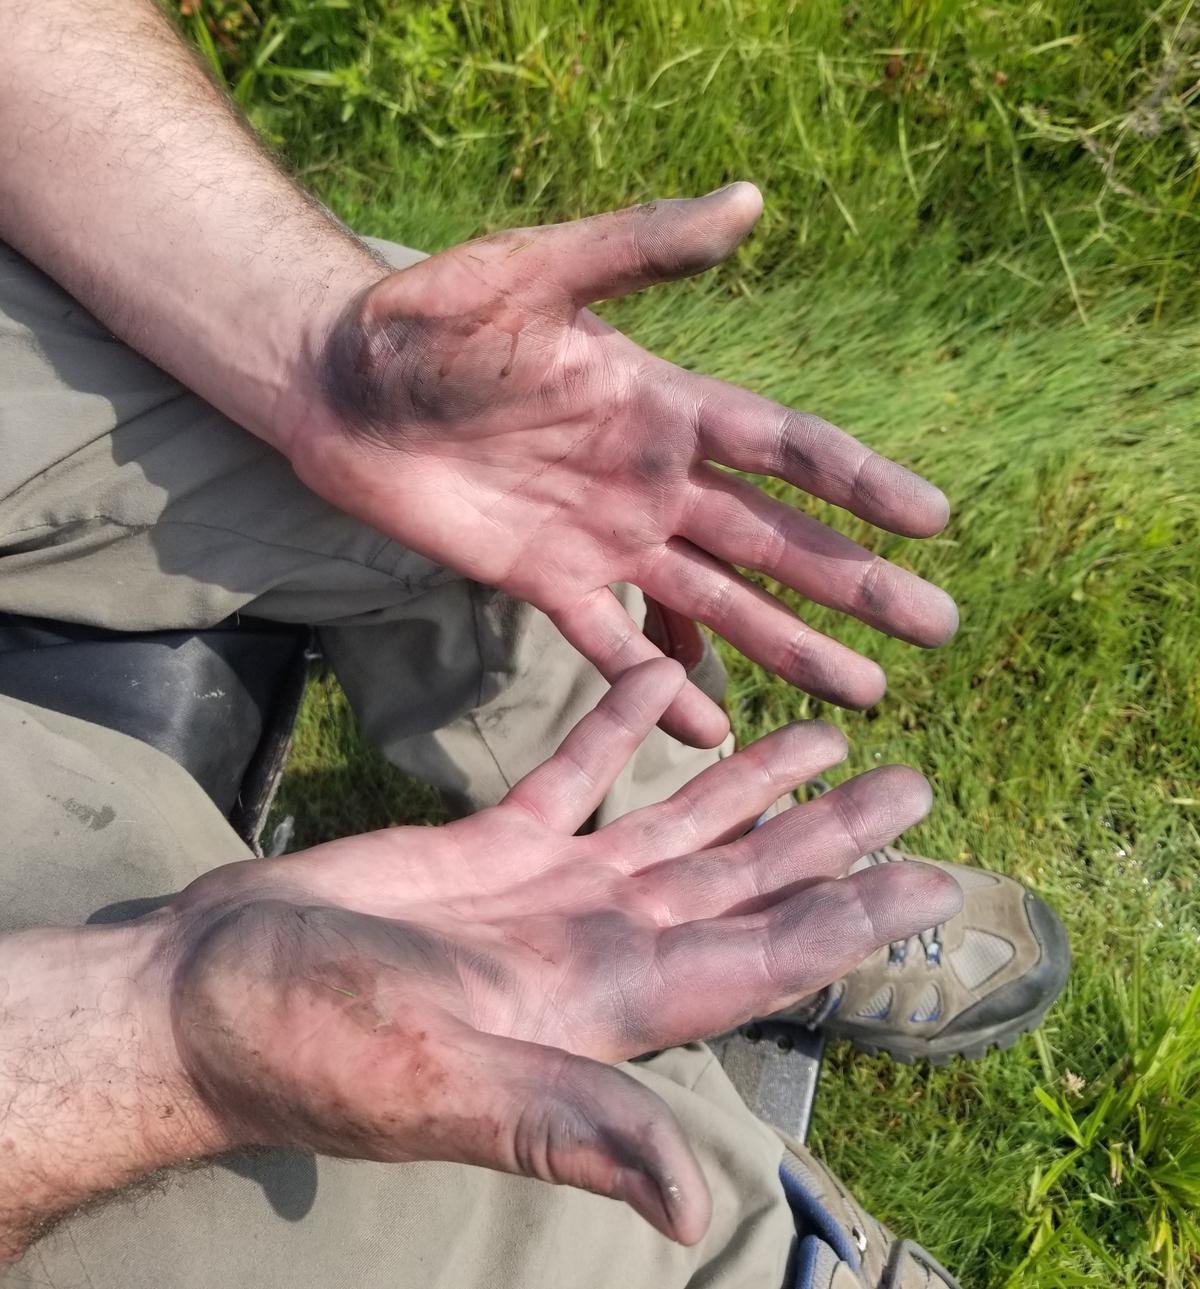 Enock's hands after pushing without gloves. Photo credit: Enock Glidden